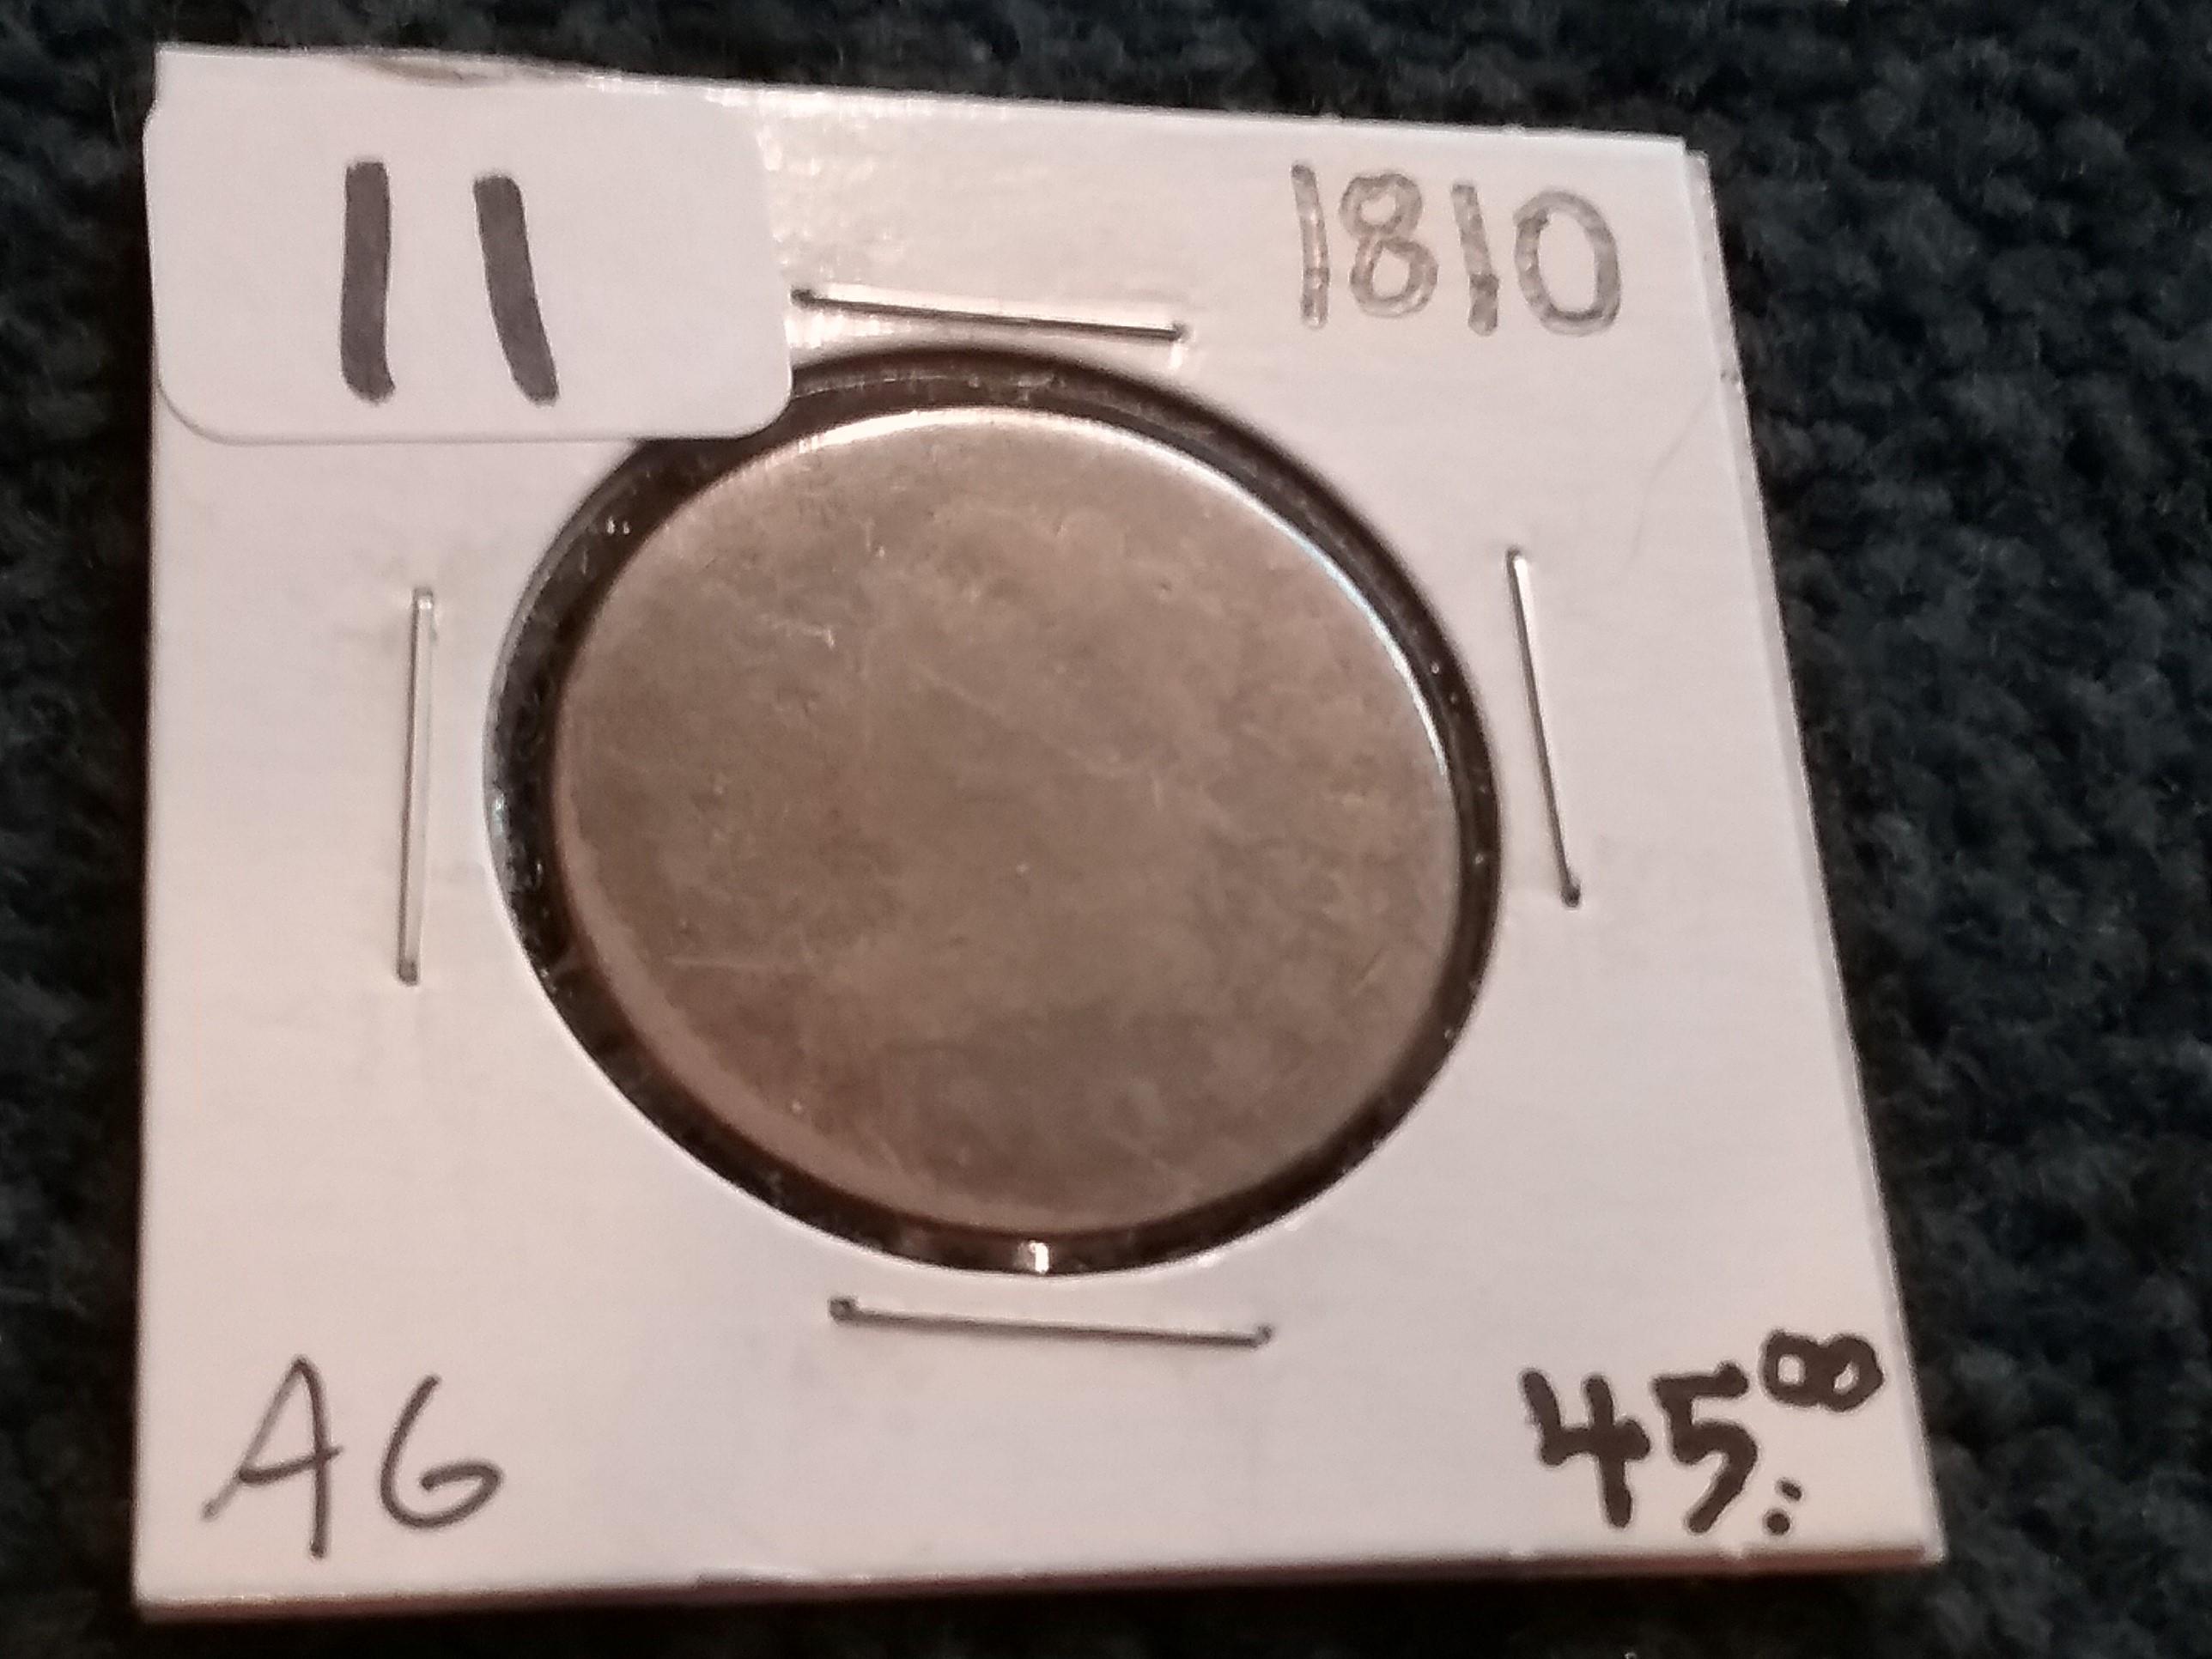 1810 Classic Head Large Cent in About Good